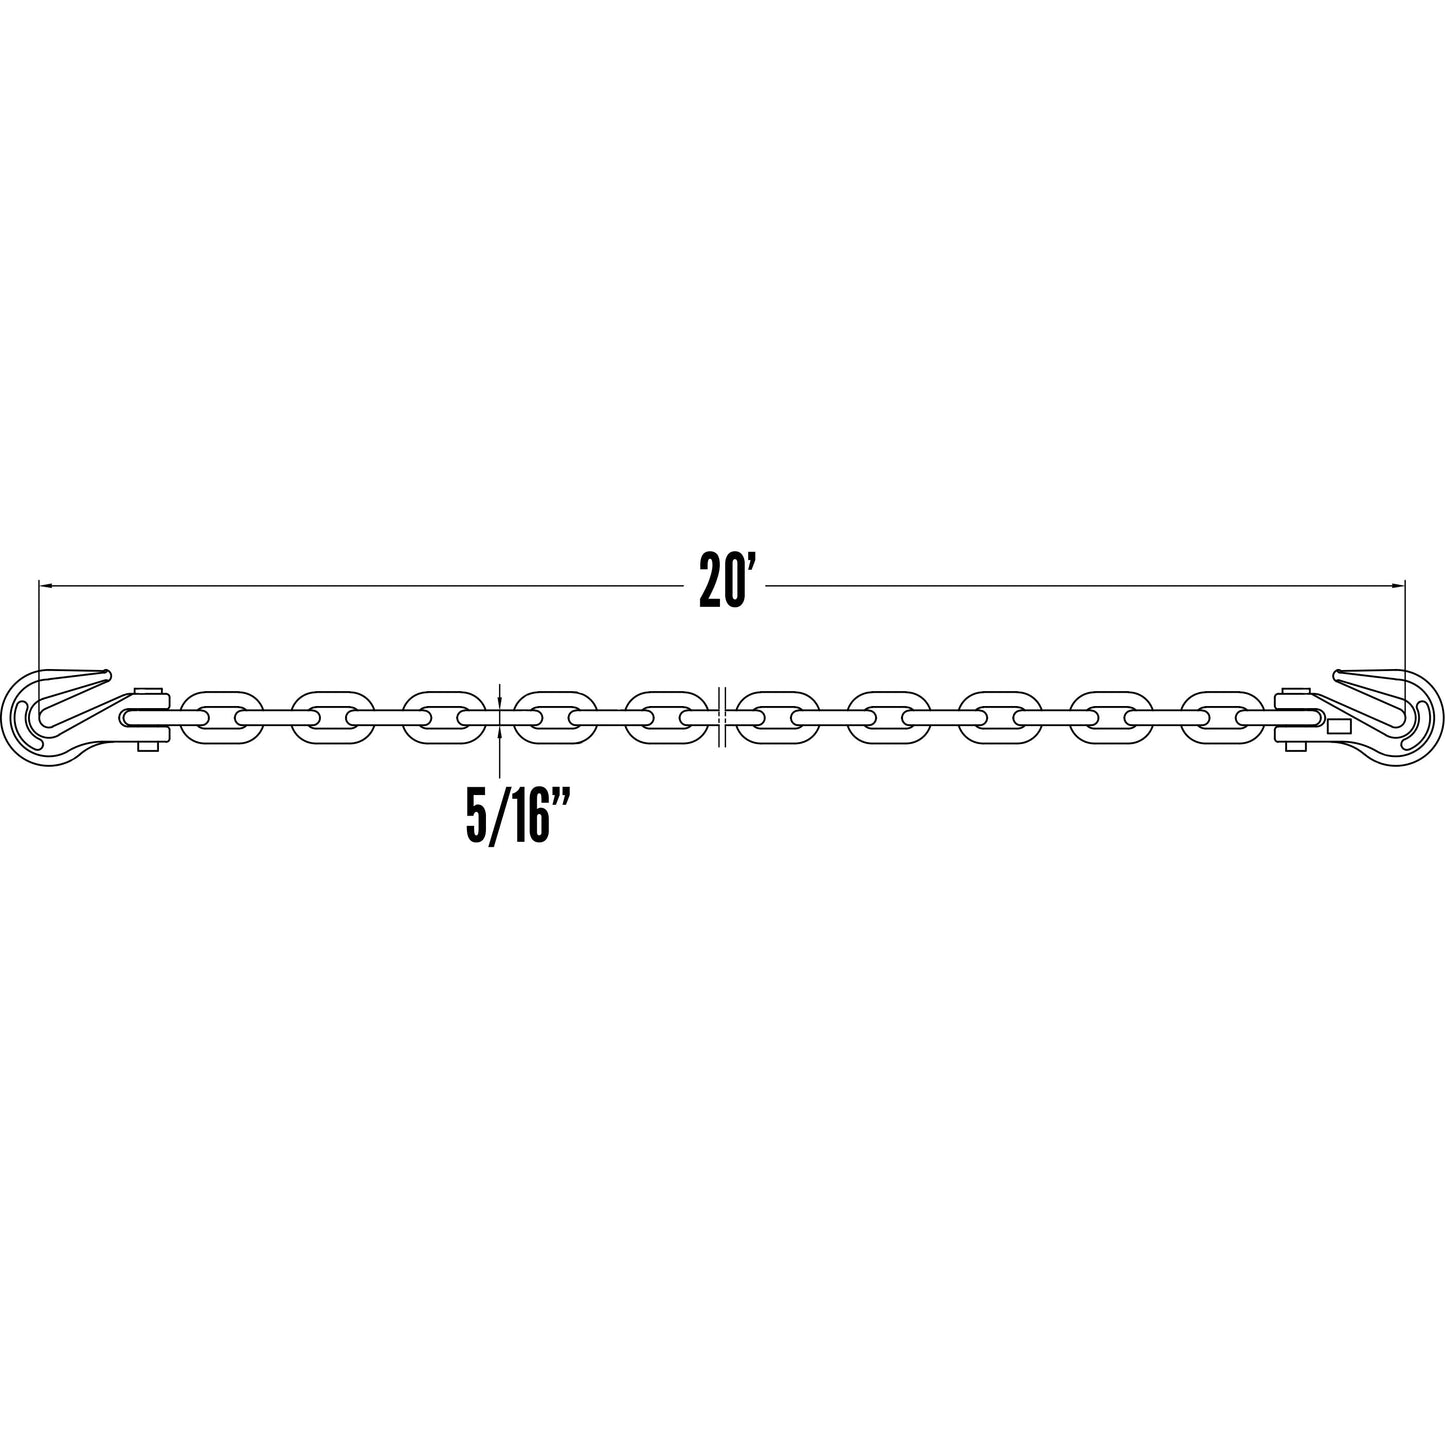 516 inch x 20 foot Transport Chain Grade 70 image 4 of 8